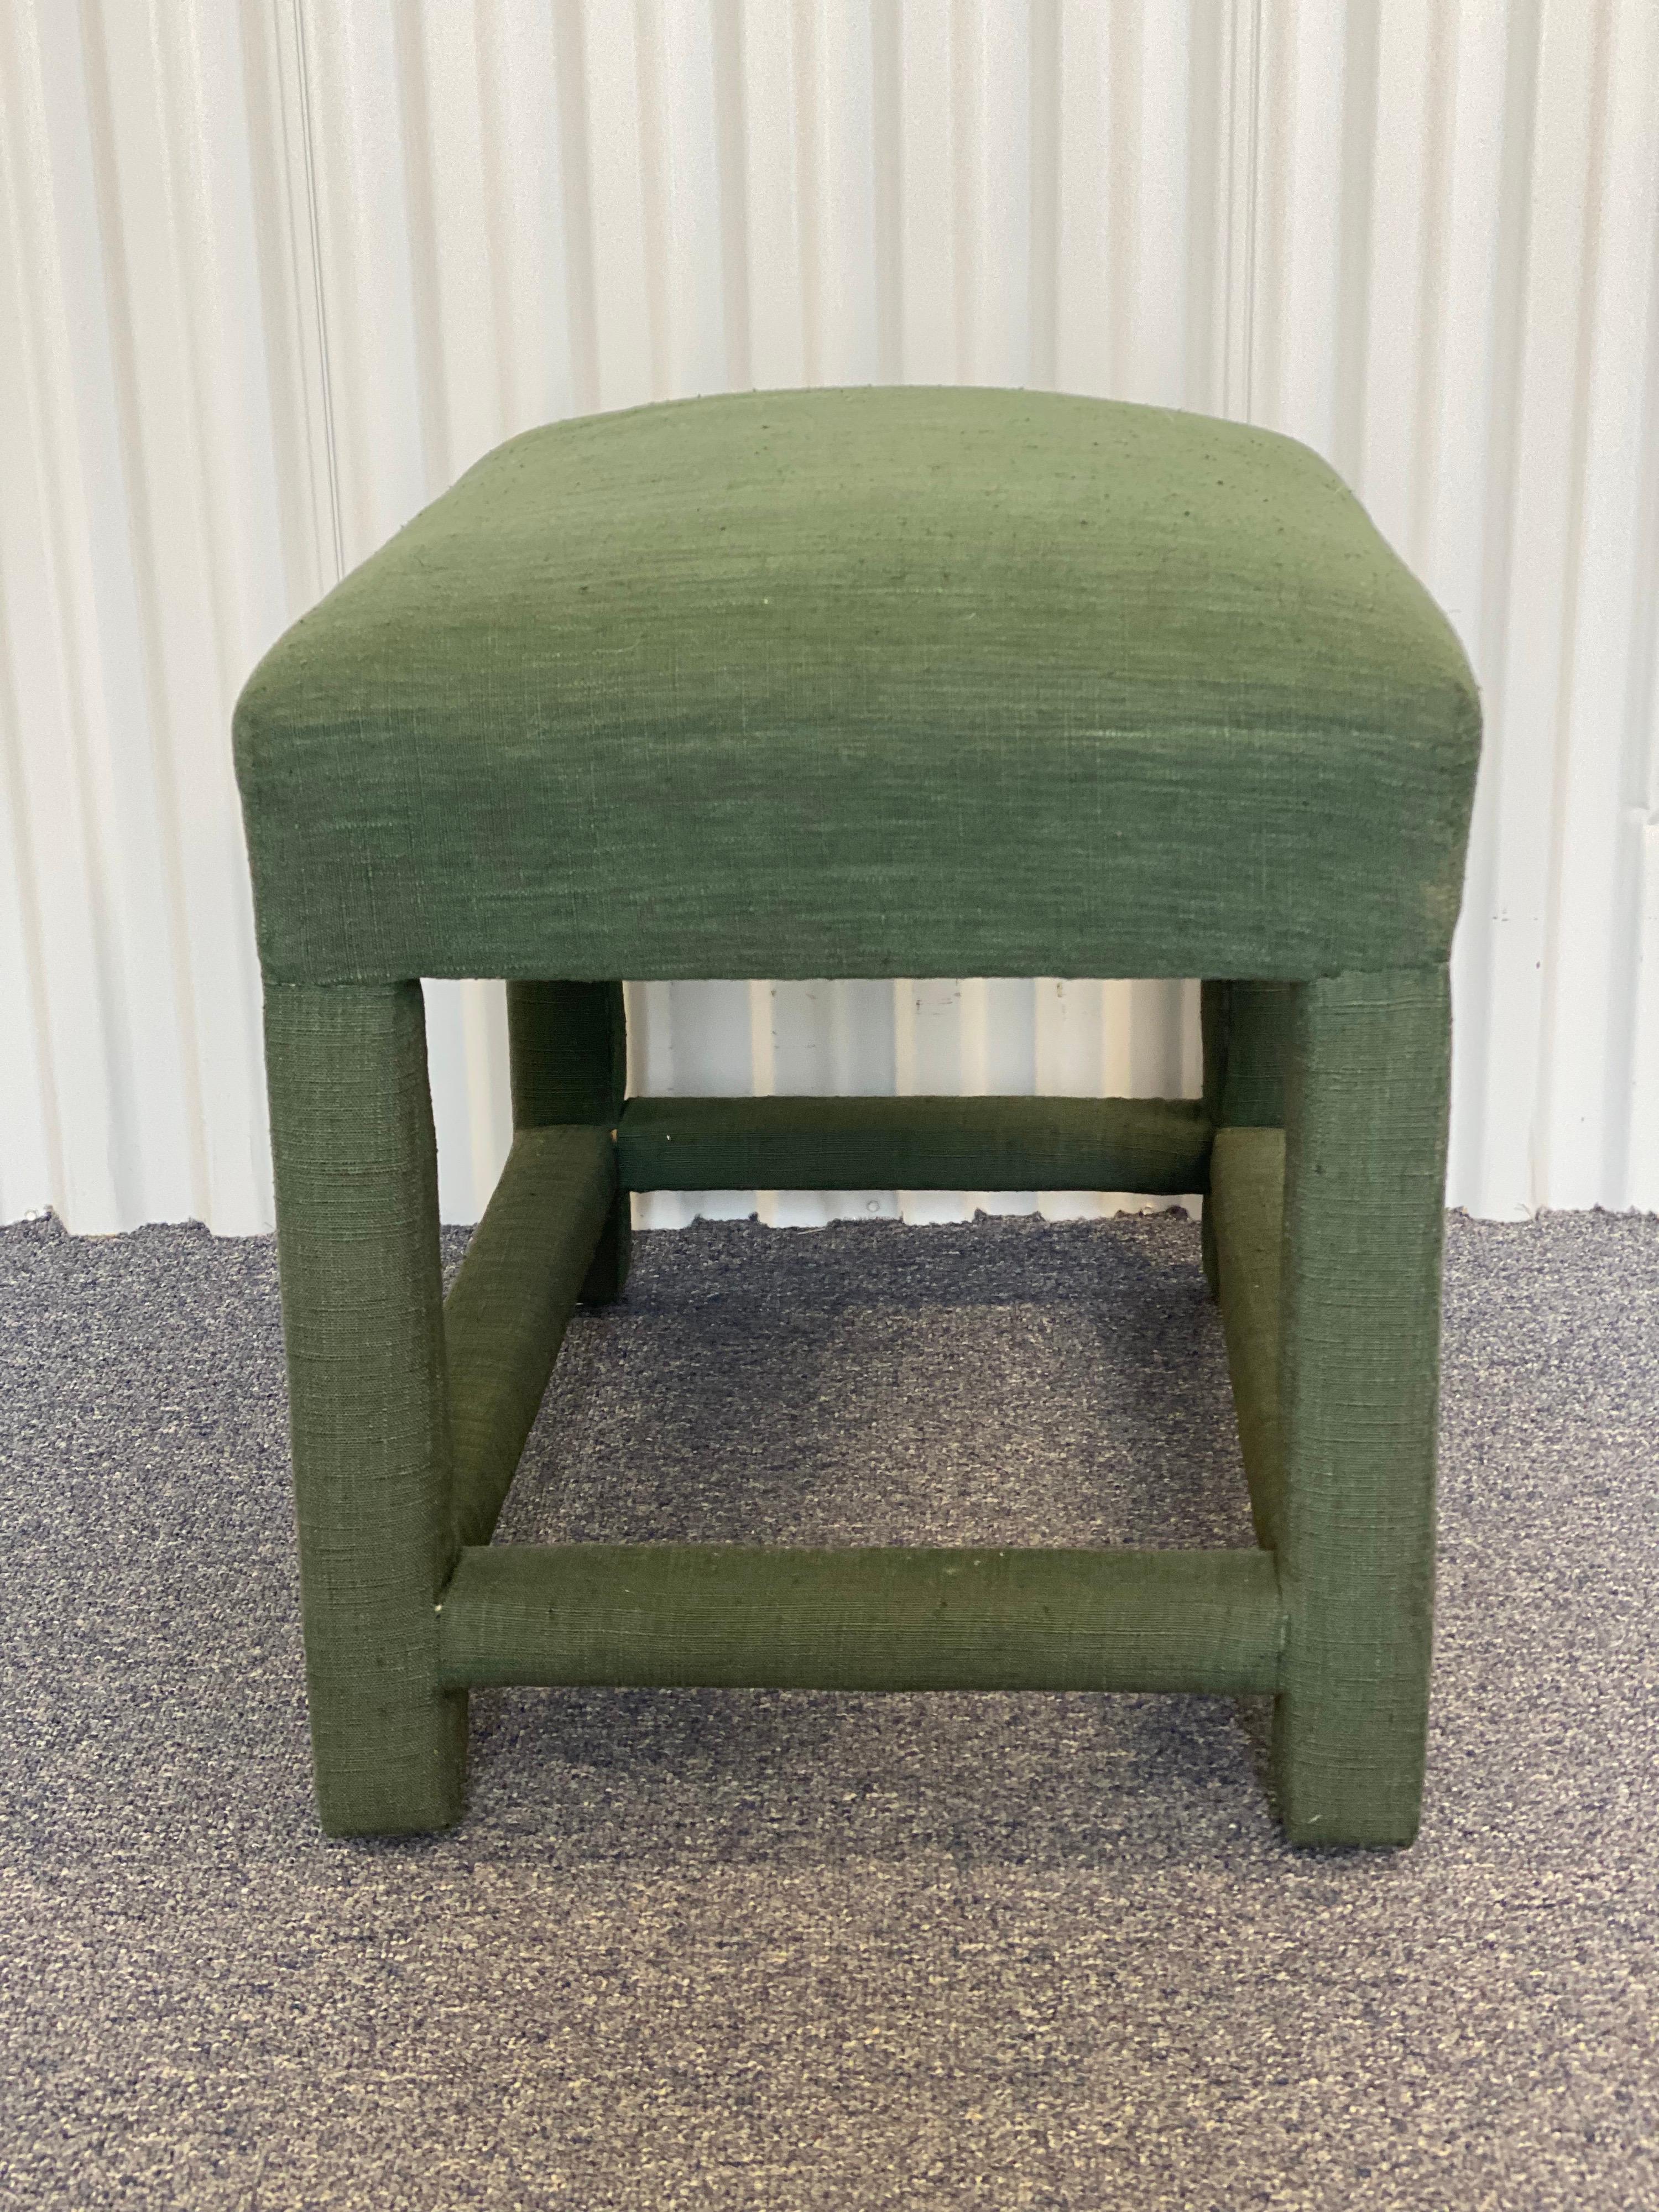 Custom Upholstered Green Linen Wrapped Stool
Parsons style simple clean lined design, wrapped and hand-sewn at the corners. 
Some very slight separation of the fabric where it wraps around the legs and slight fading, otherwise good condition.

